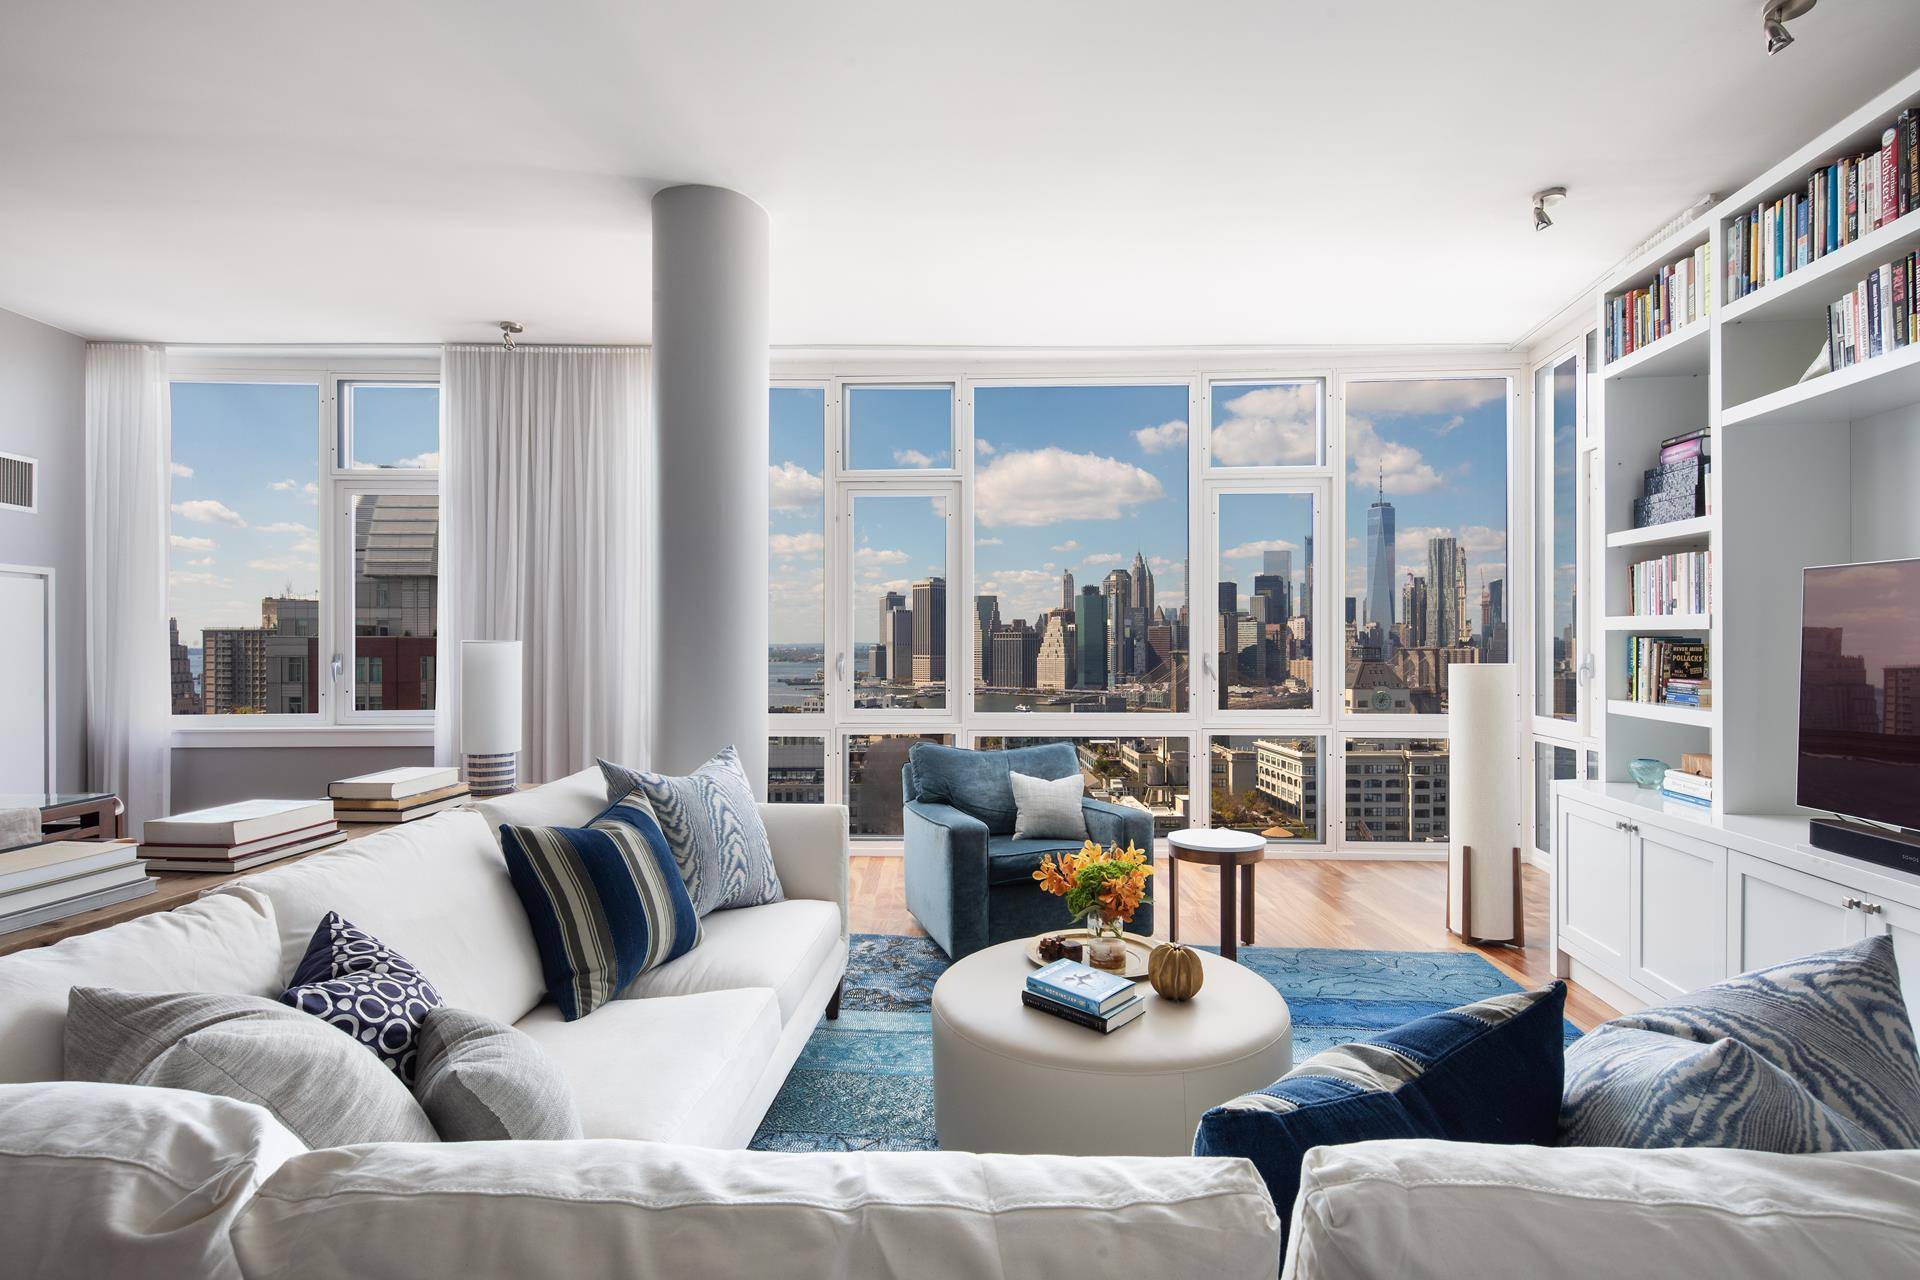 CONVERTIBLE THREE BEDROOMS apartment with views overlooking Manhattan is the stylish apartment that you have been seeking.